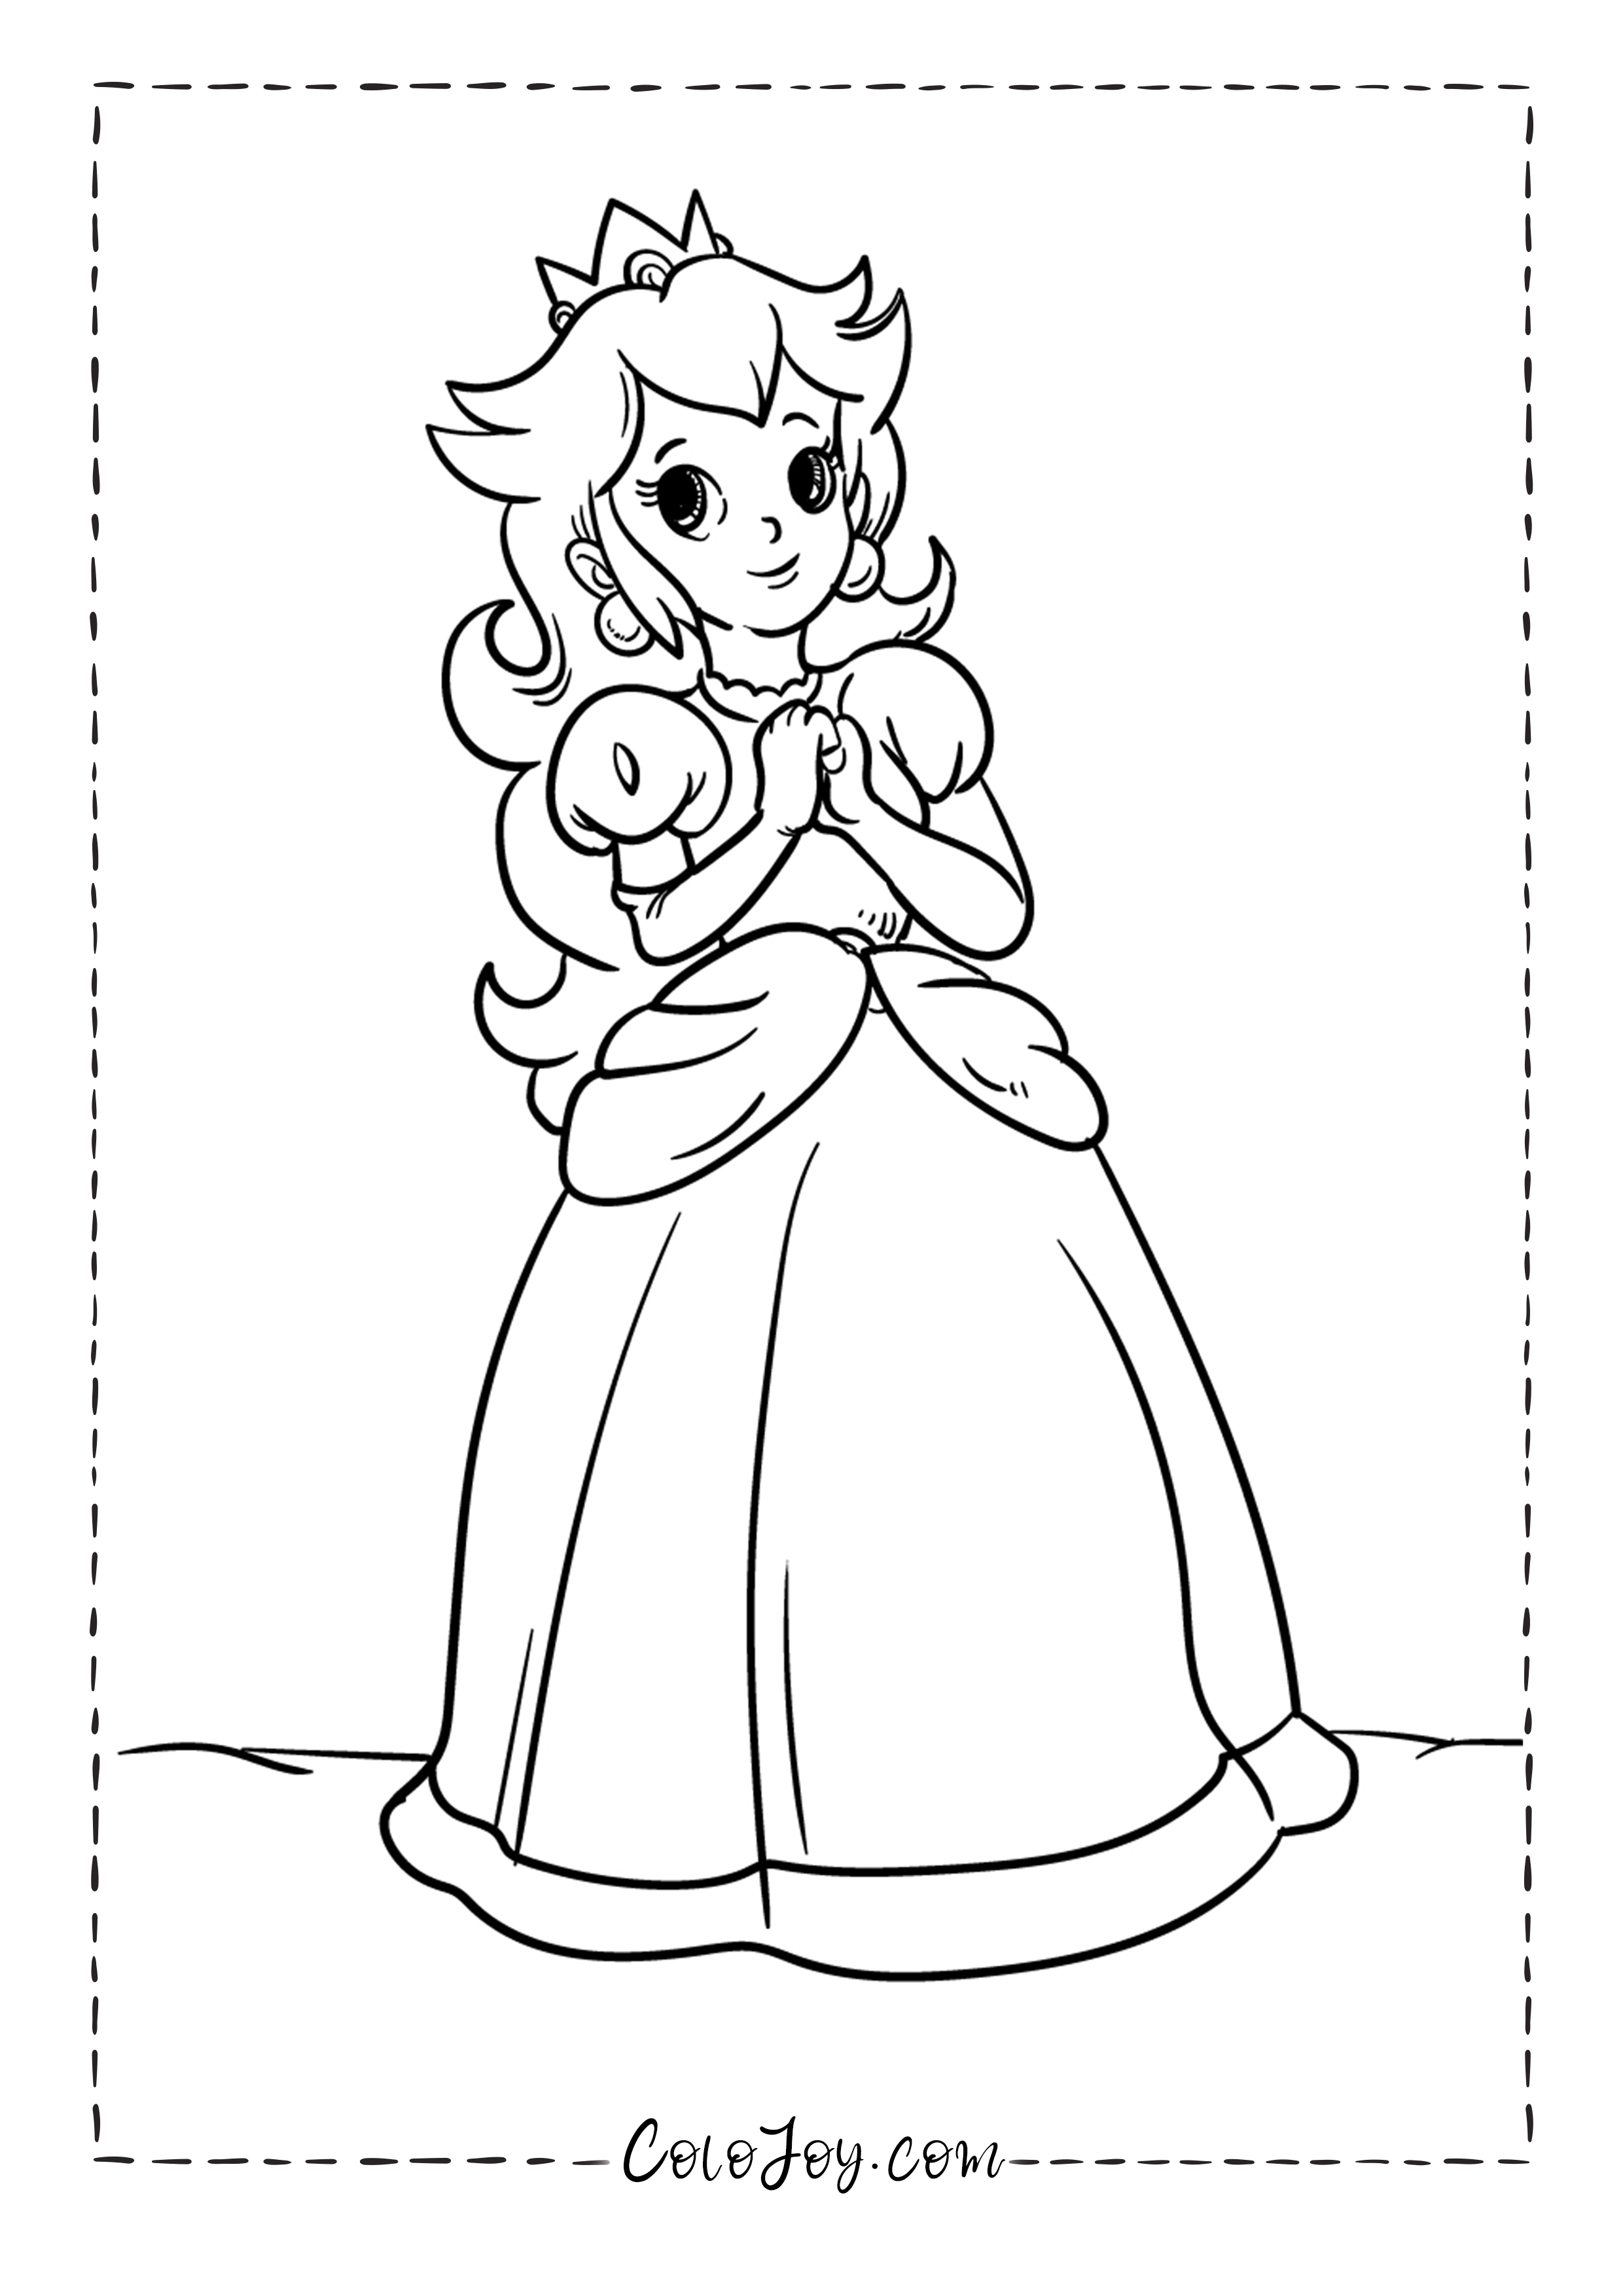 Princess Peach Coloring Pages for Kids 67